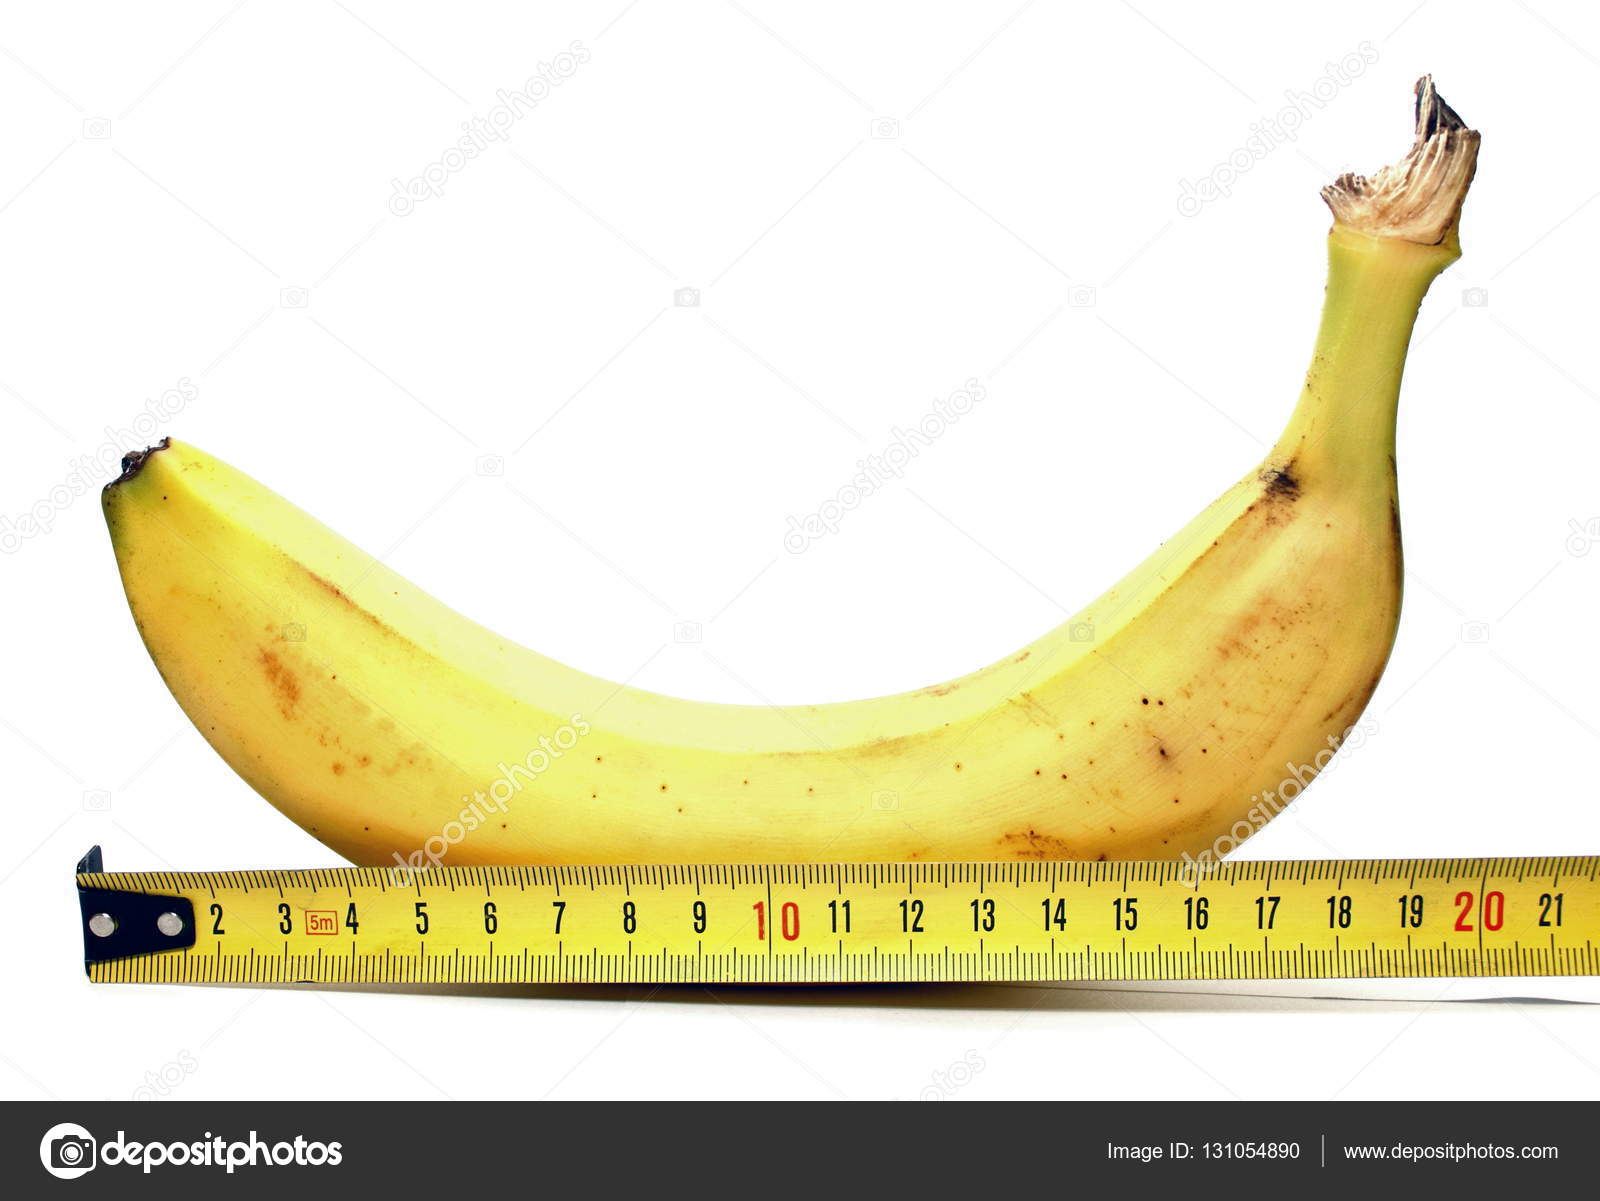 How Big Is A Large Penis